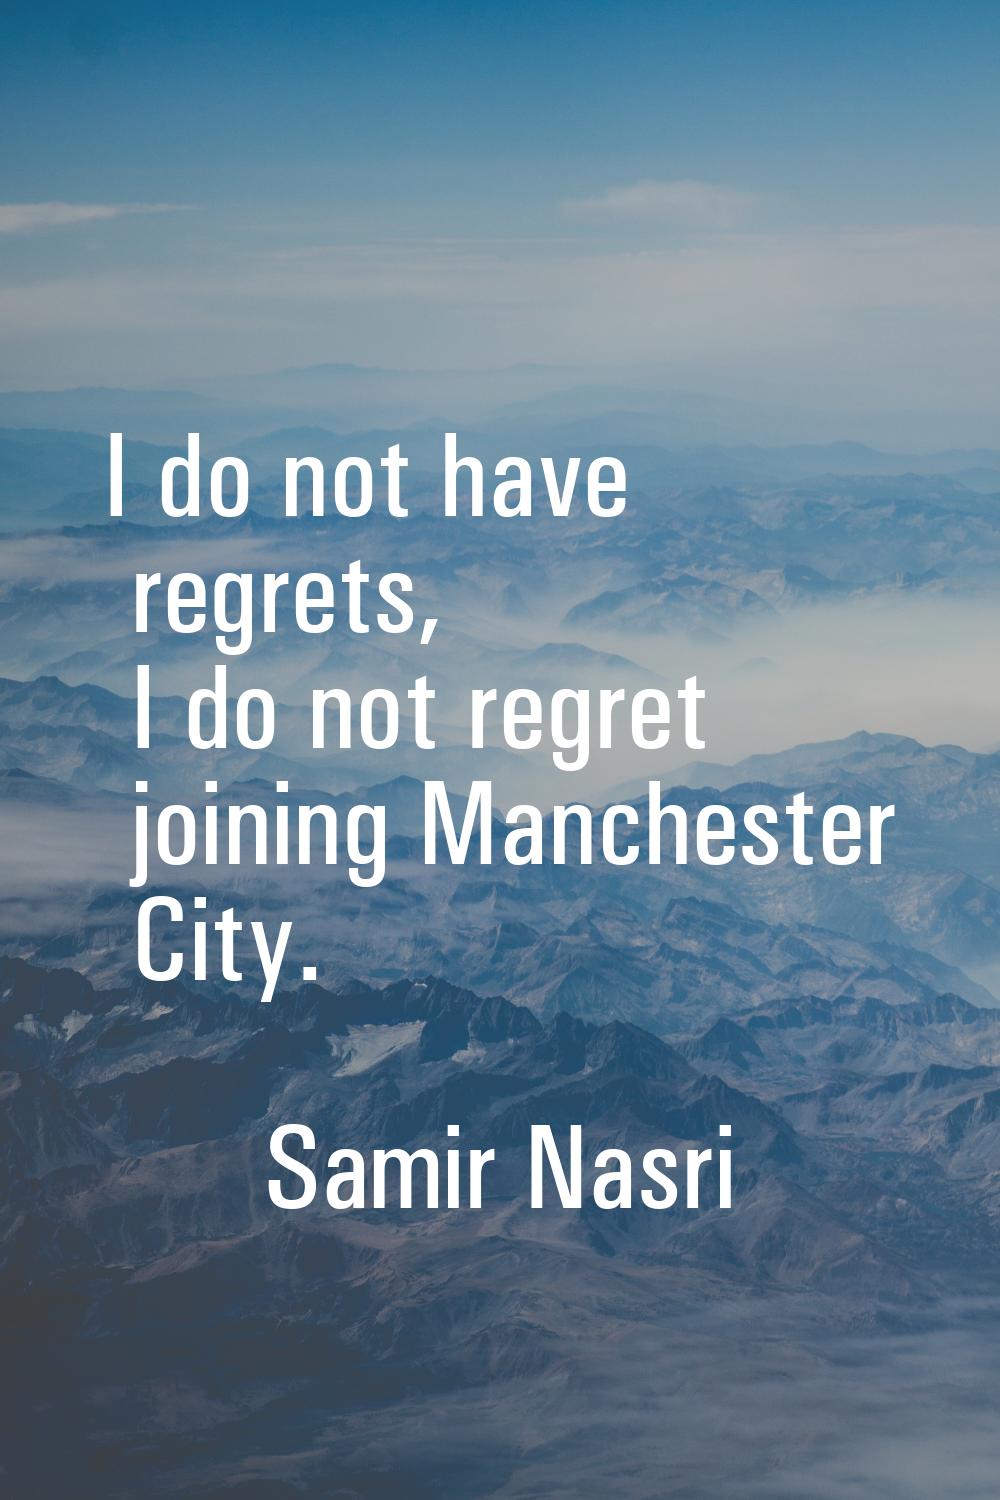 I do not have regrets, I do not regret joining Manchester City.